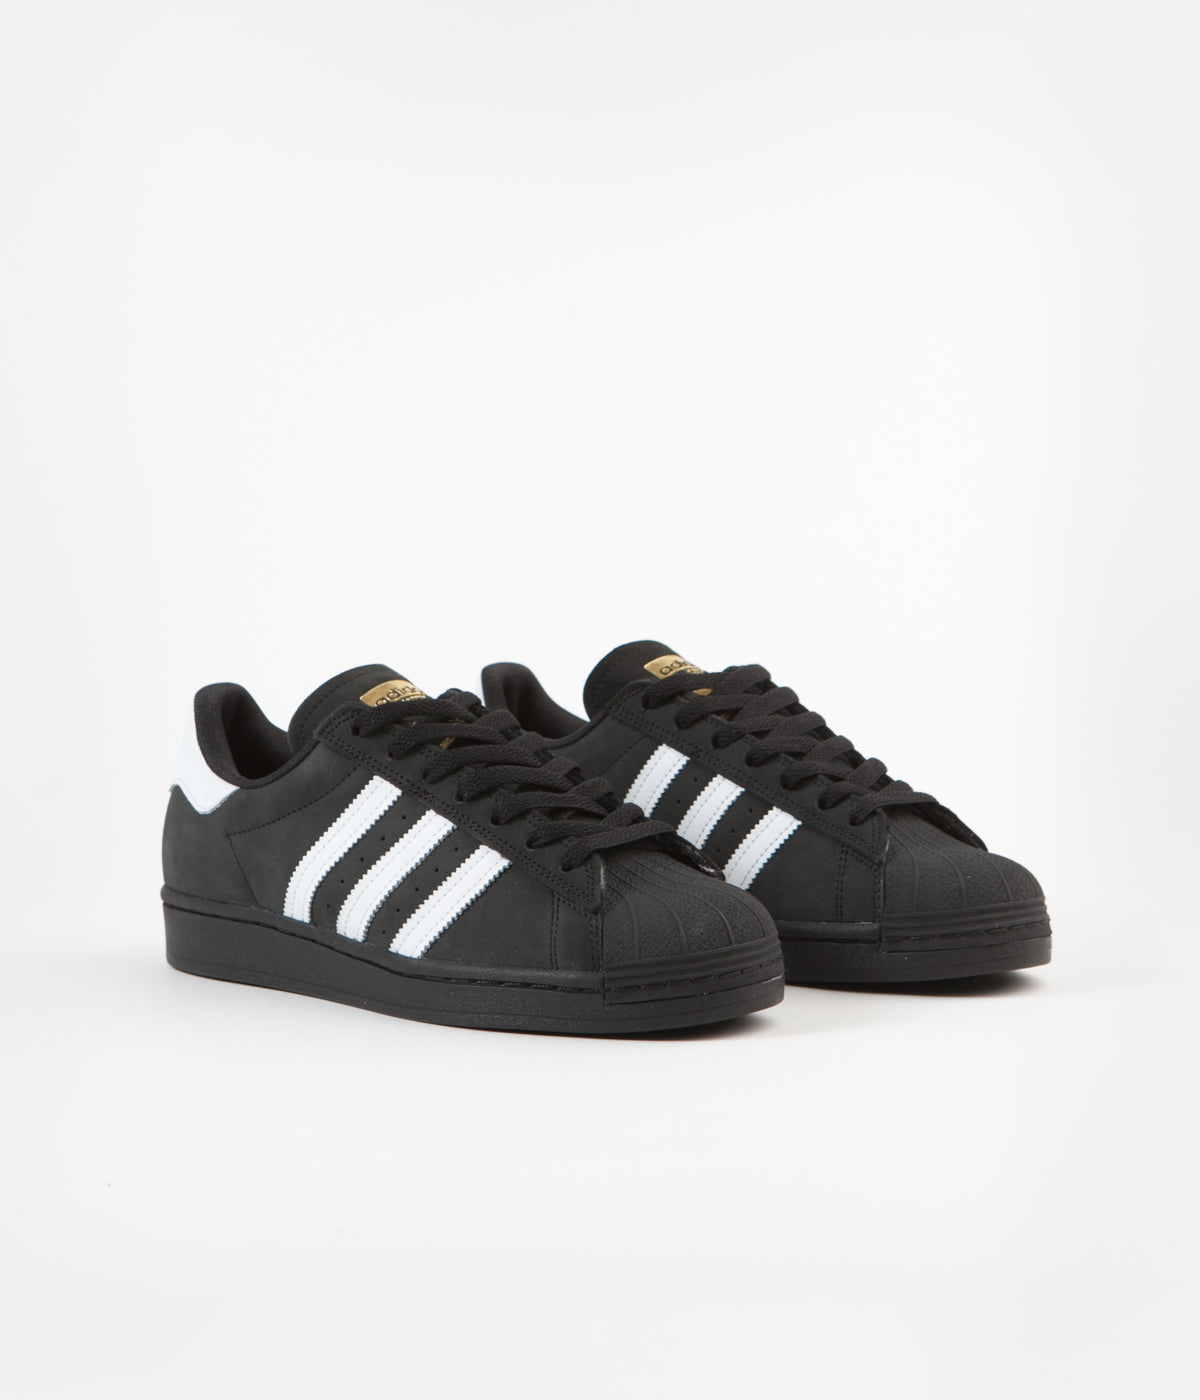 adidas superstar foundation shoes size 6